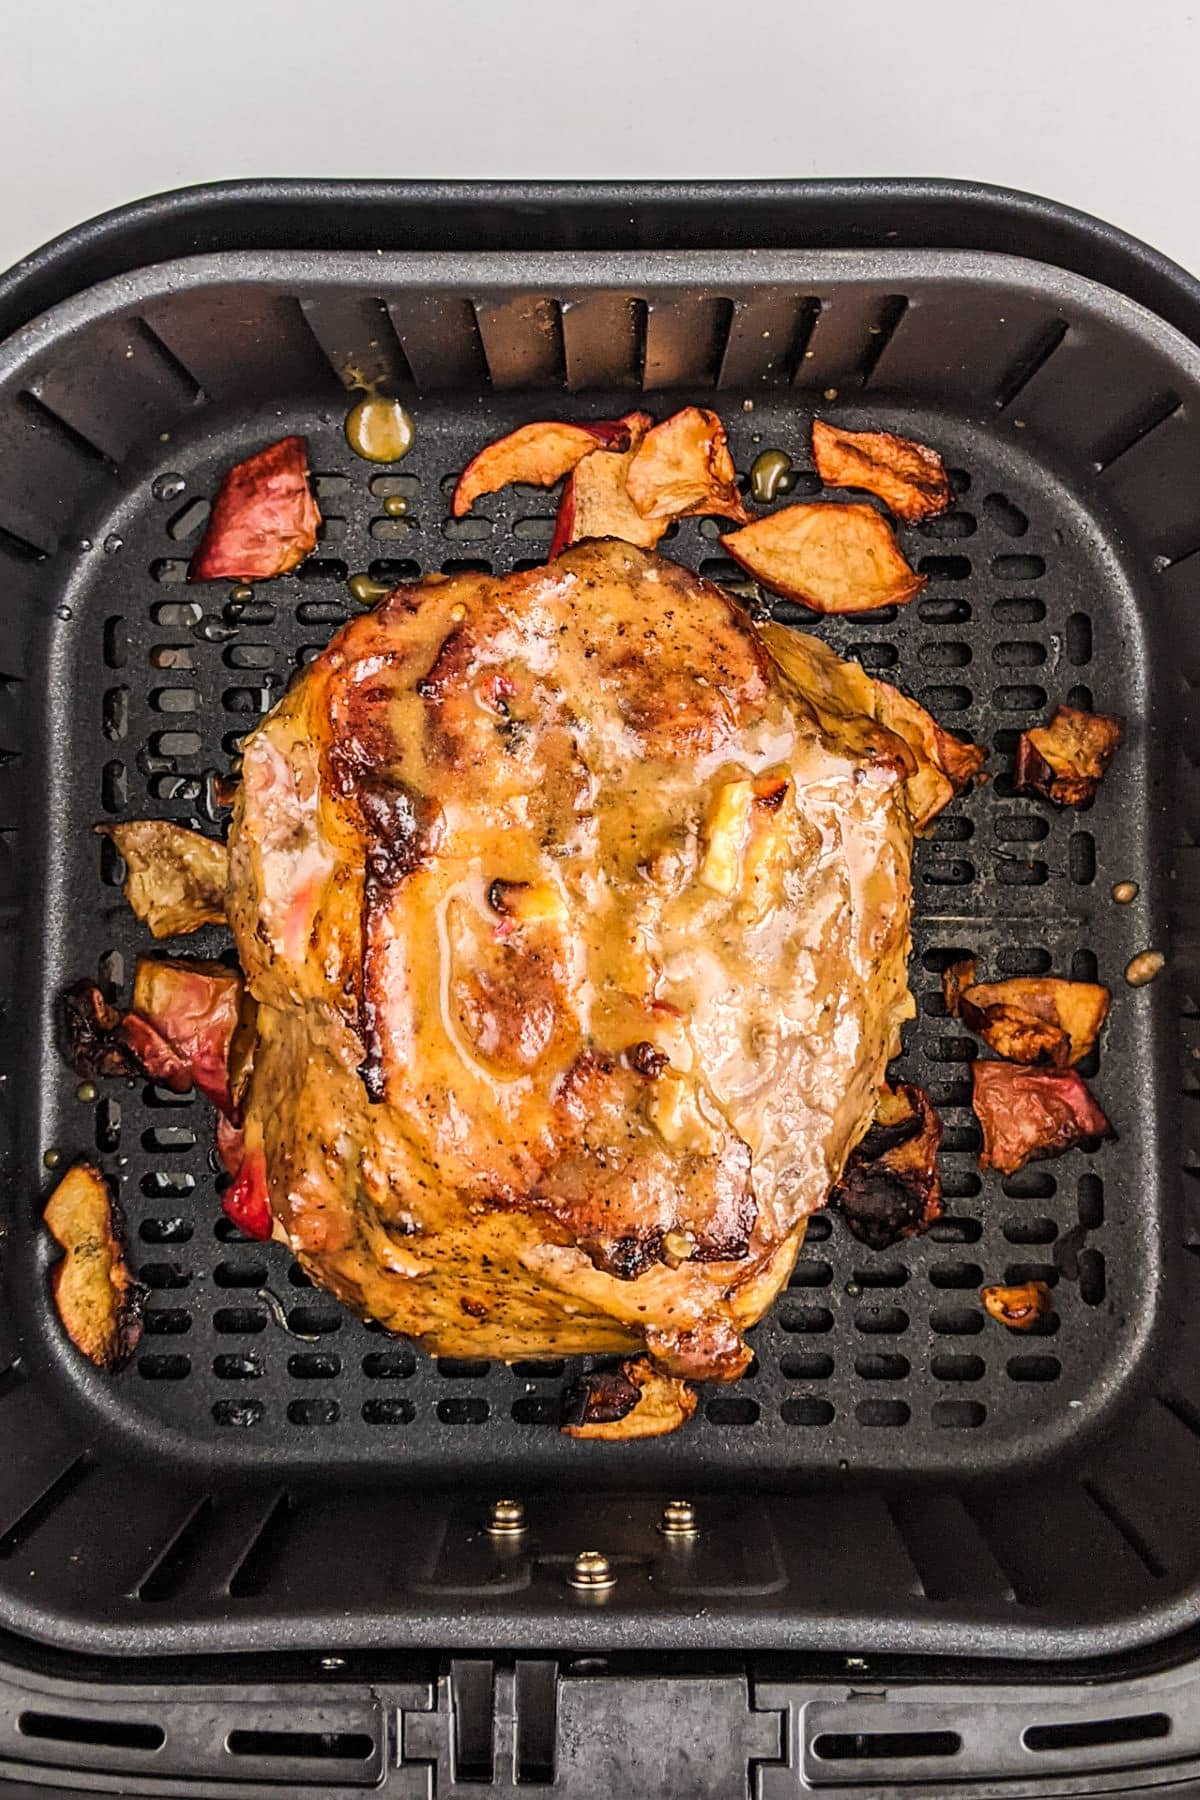 Cooked juicy pork roast with apple slices.